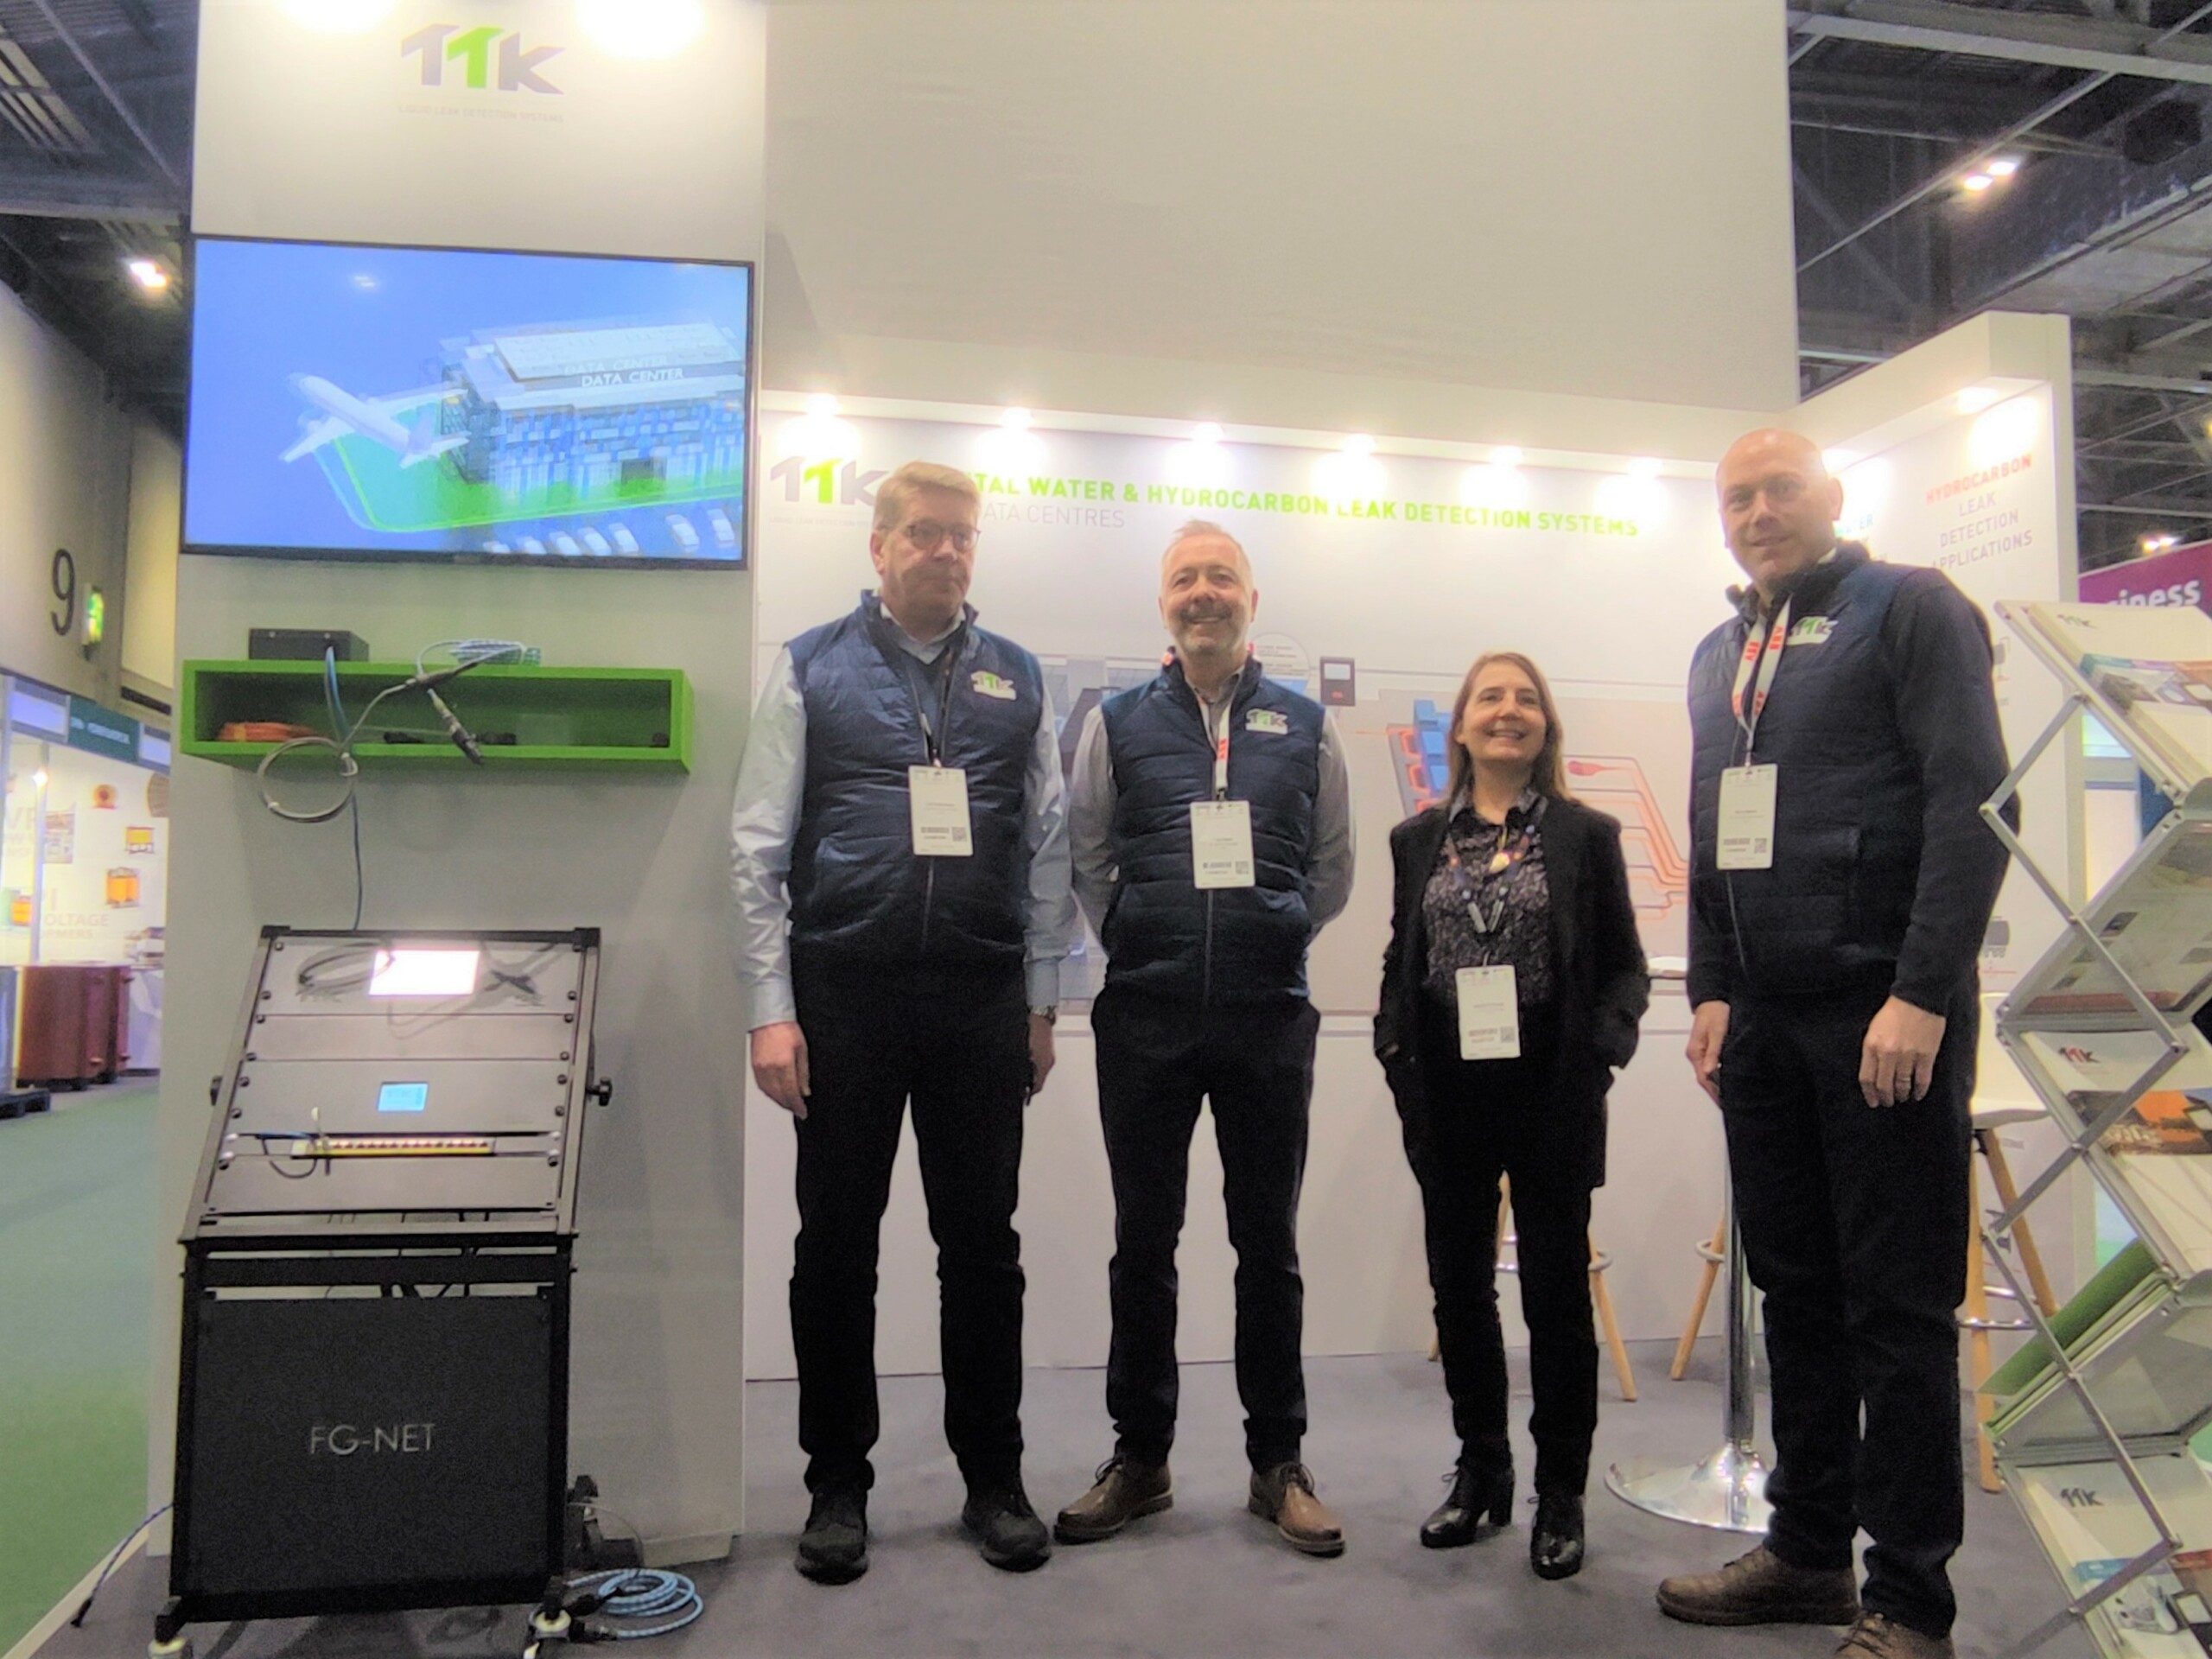 TTK thank you for visiting us at Data Centre World London 2023